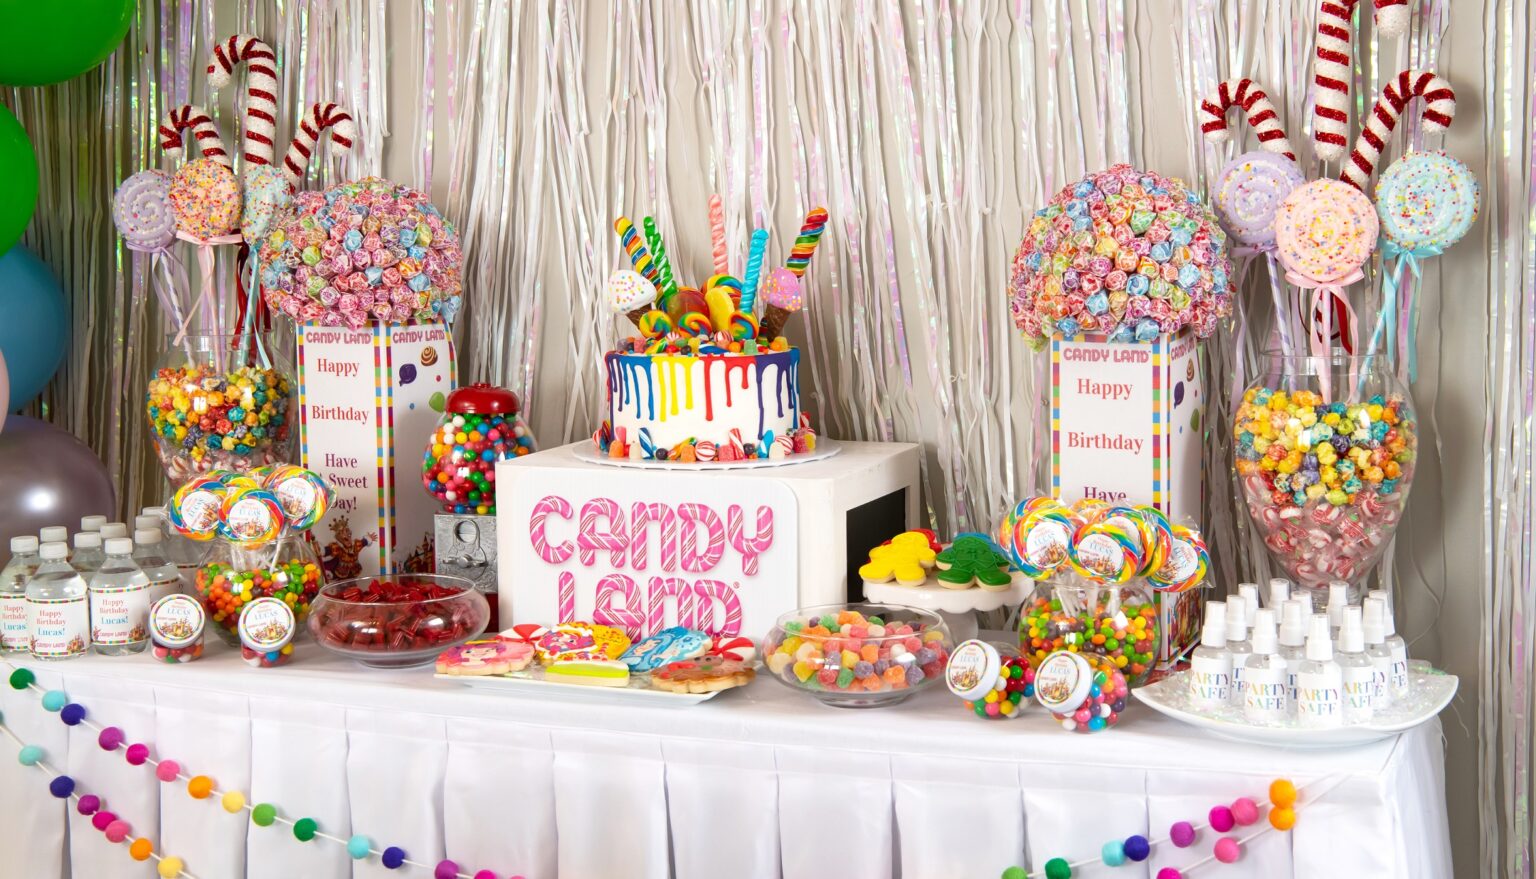 candy-land-birthday-party-with-candy-bar